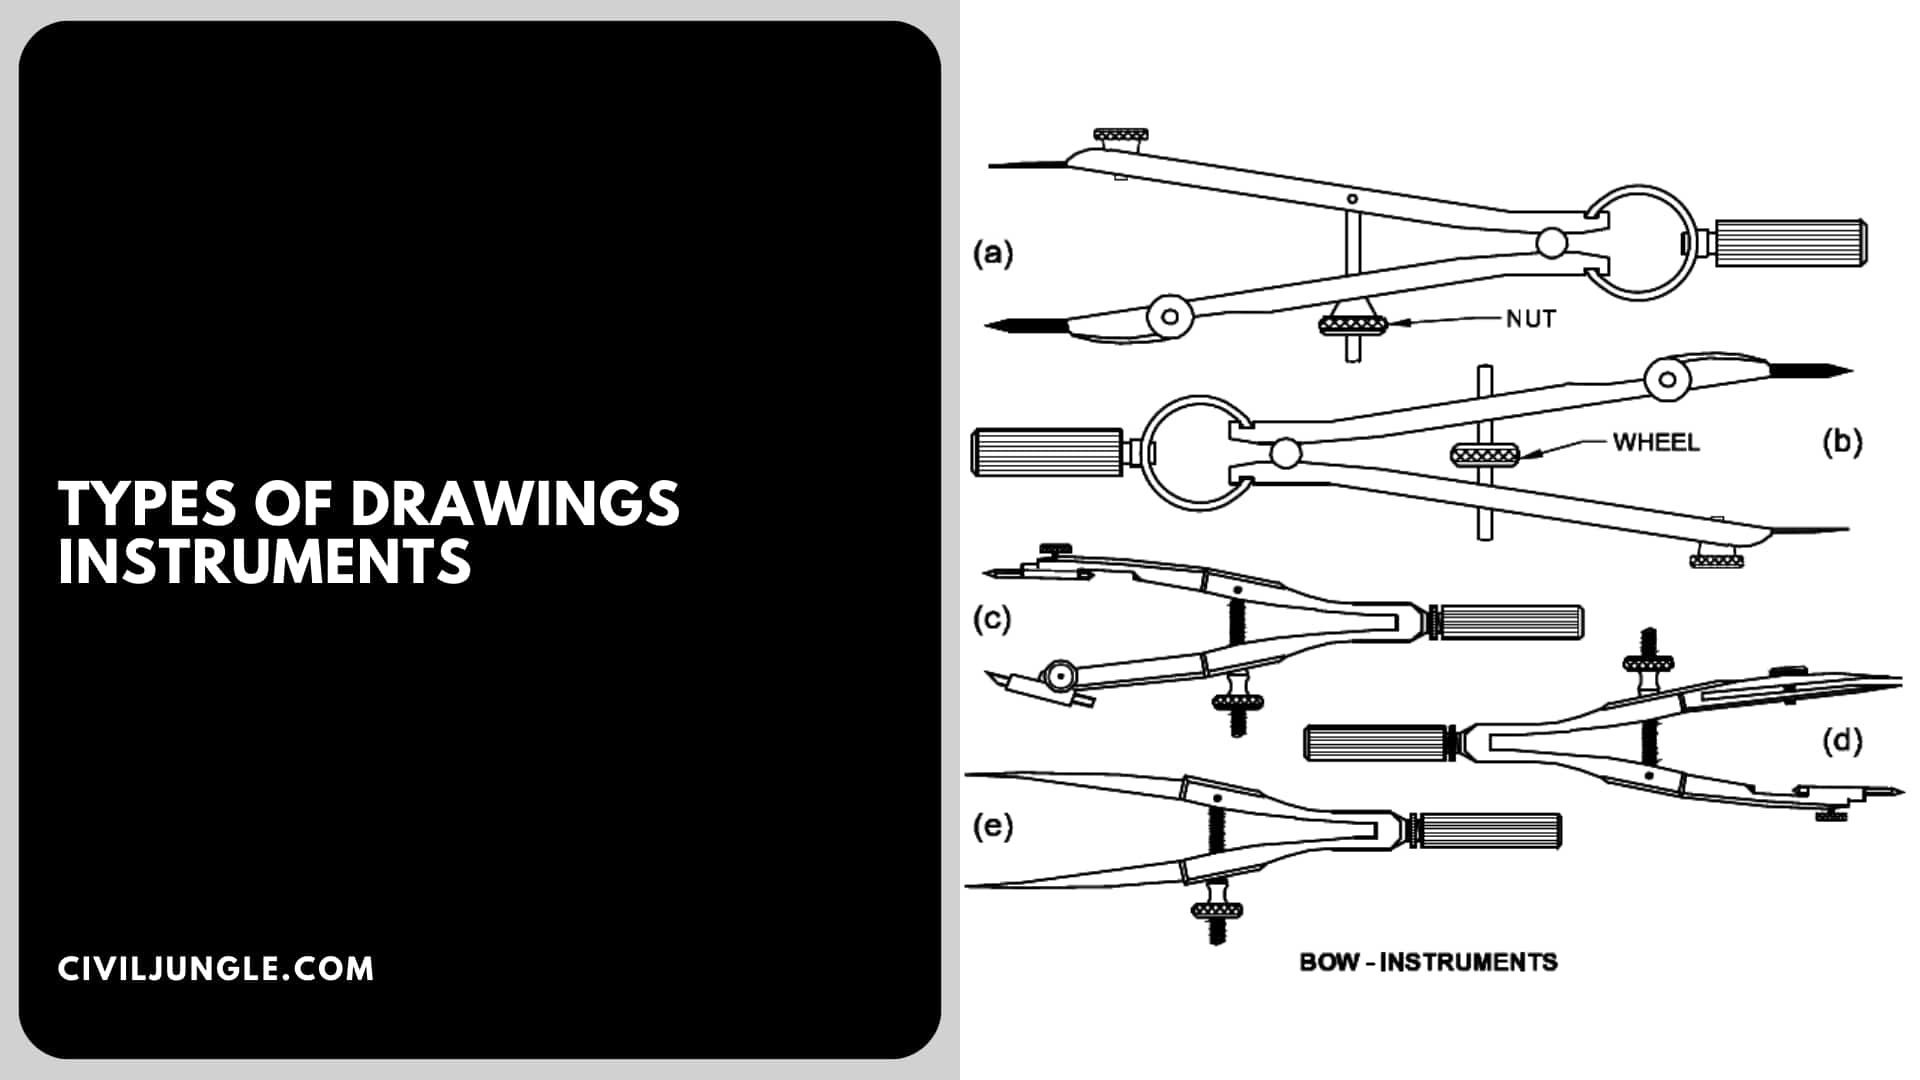 Types of Drawings Instruments